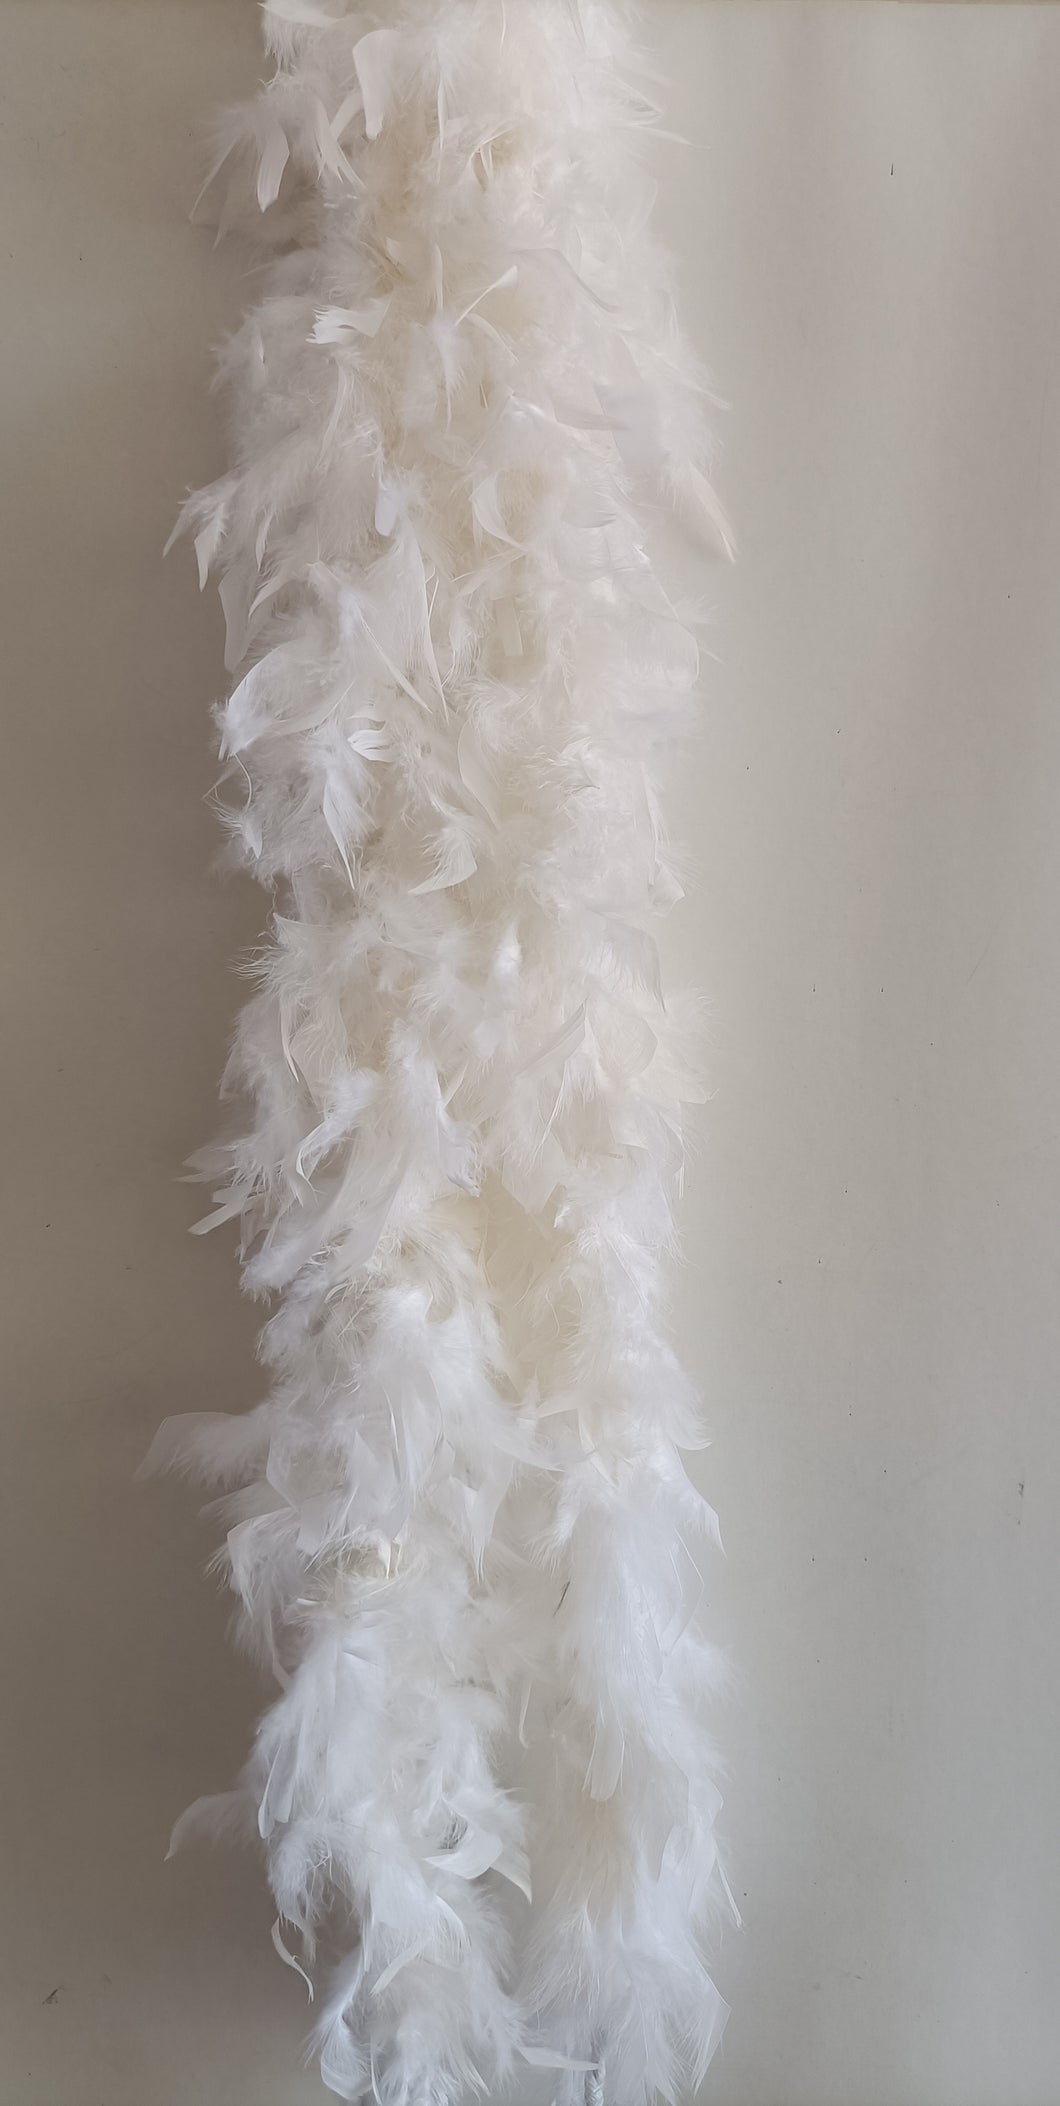 Mardi Gras Creations White Solid Color Feather Boas - Individual